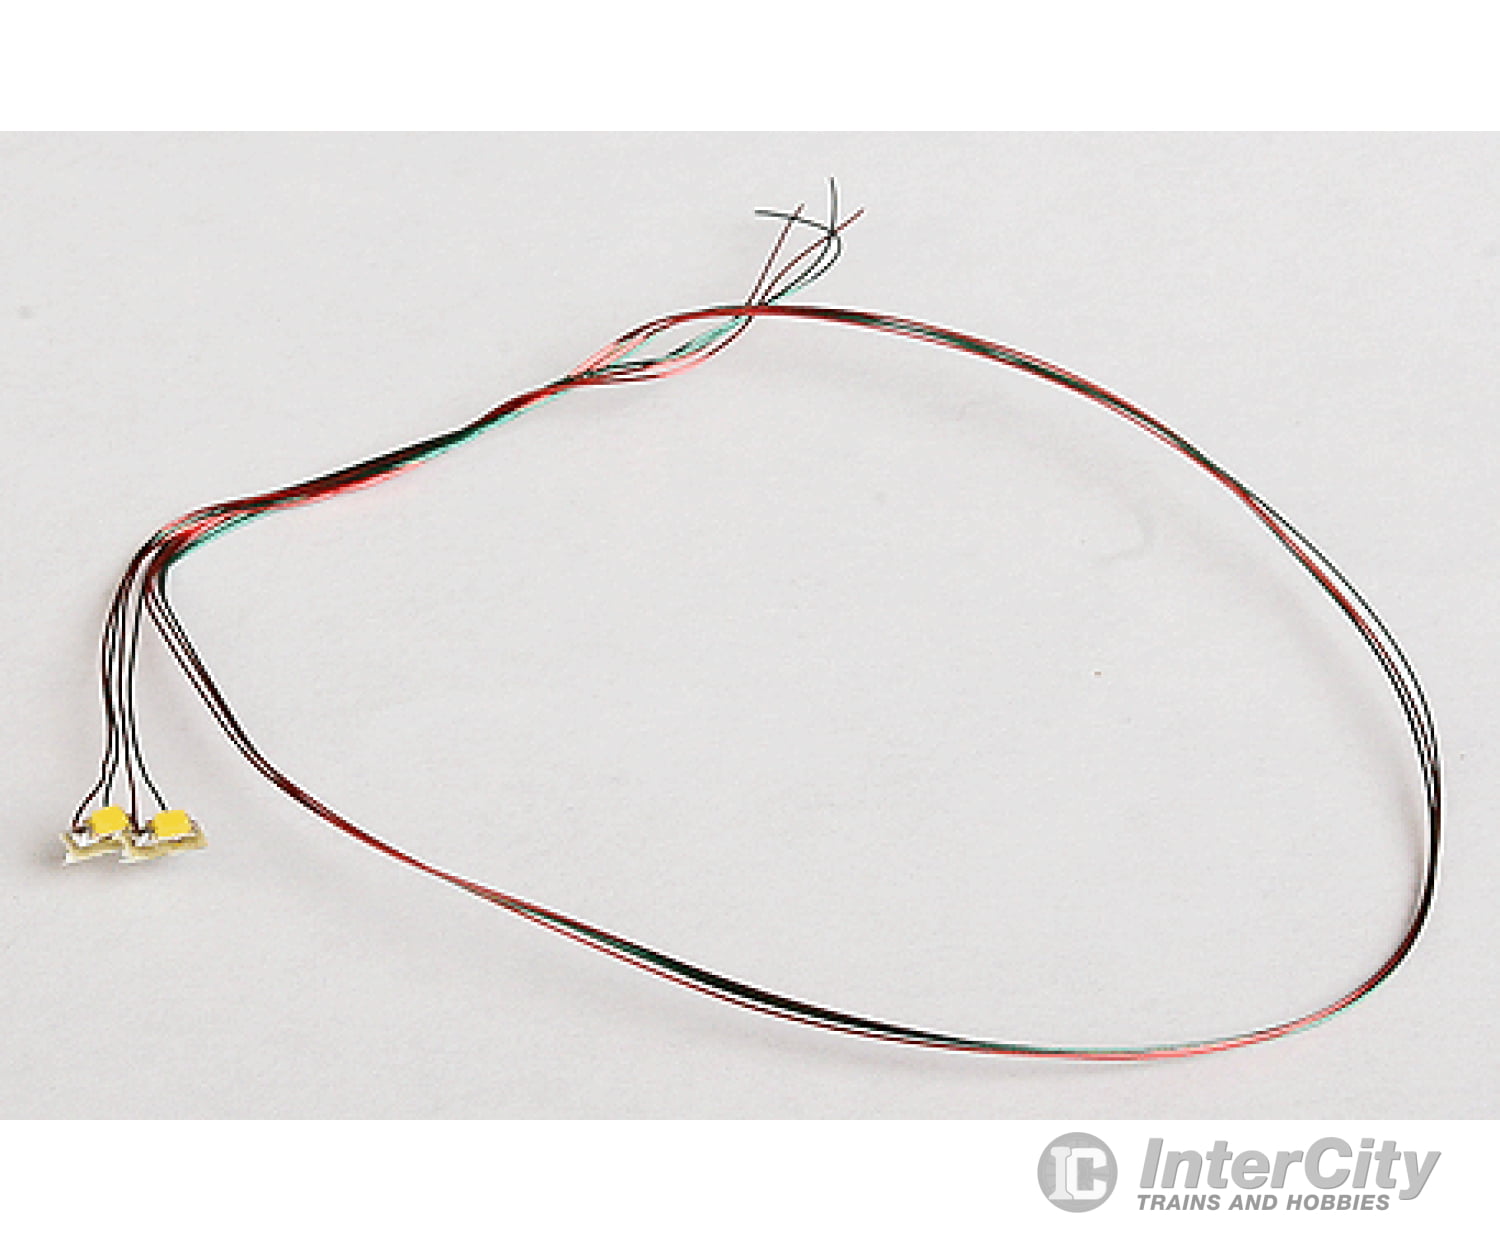 Tcs Surface-Mount Led W/Attached Magnet Wire Leads - Sunny White Pkg(2) Lights & Electronics